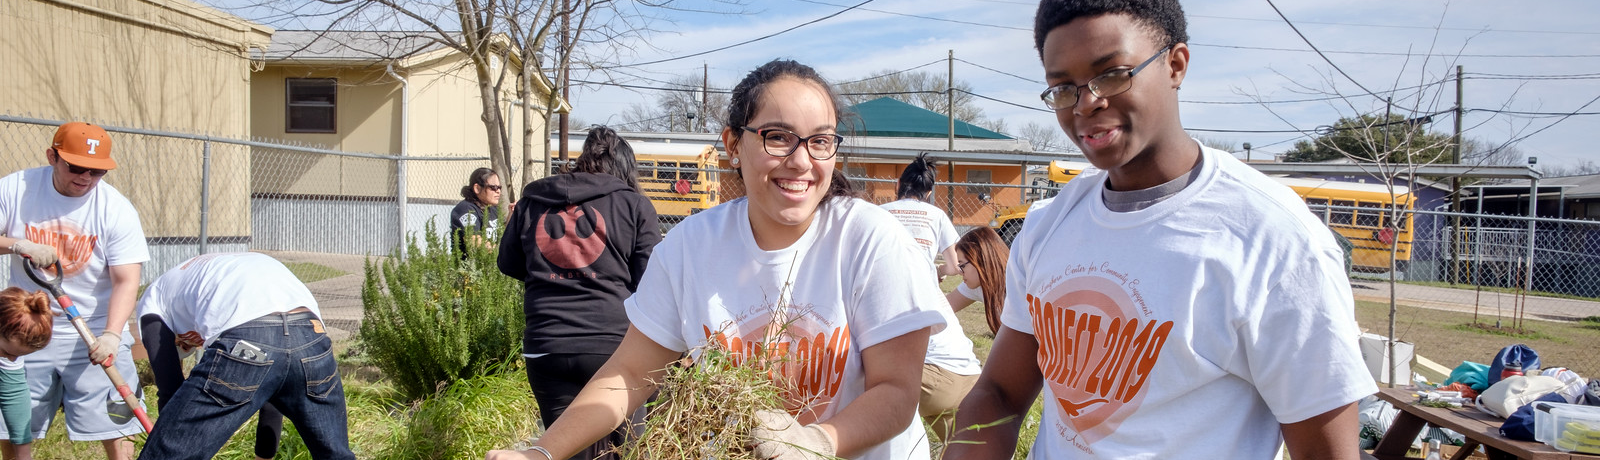 Austin’s Central Resource for Volunteerism and Service-learning